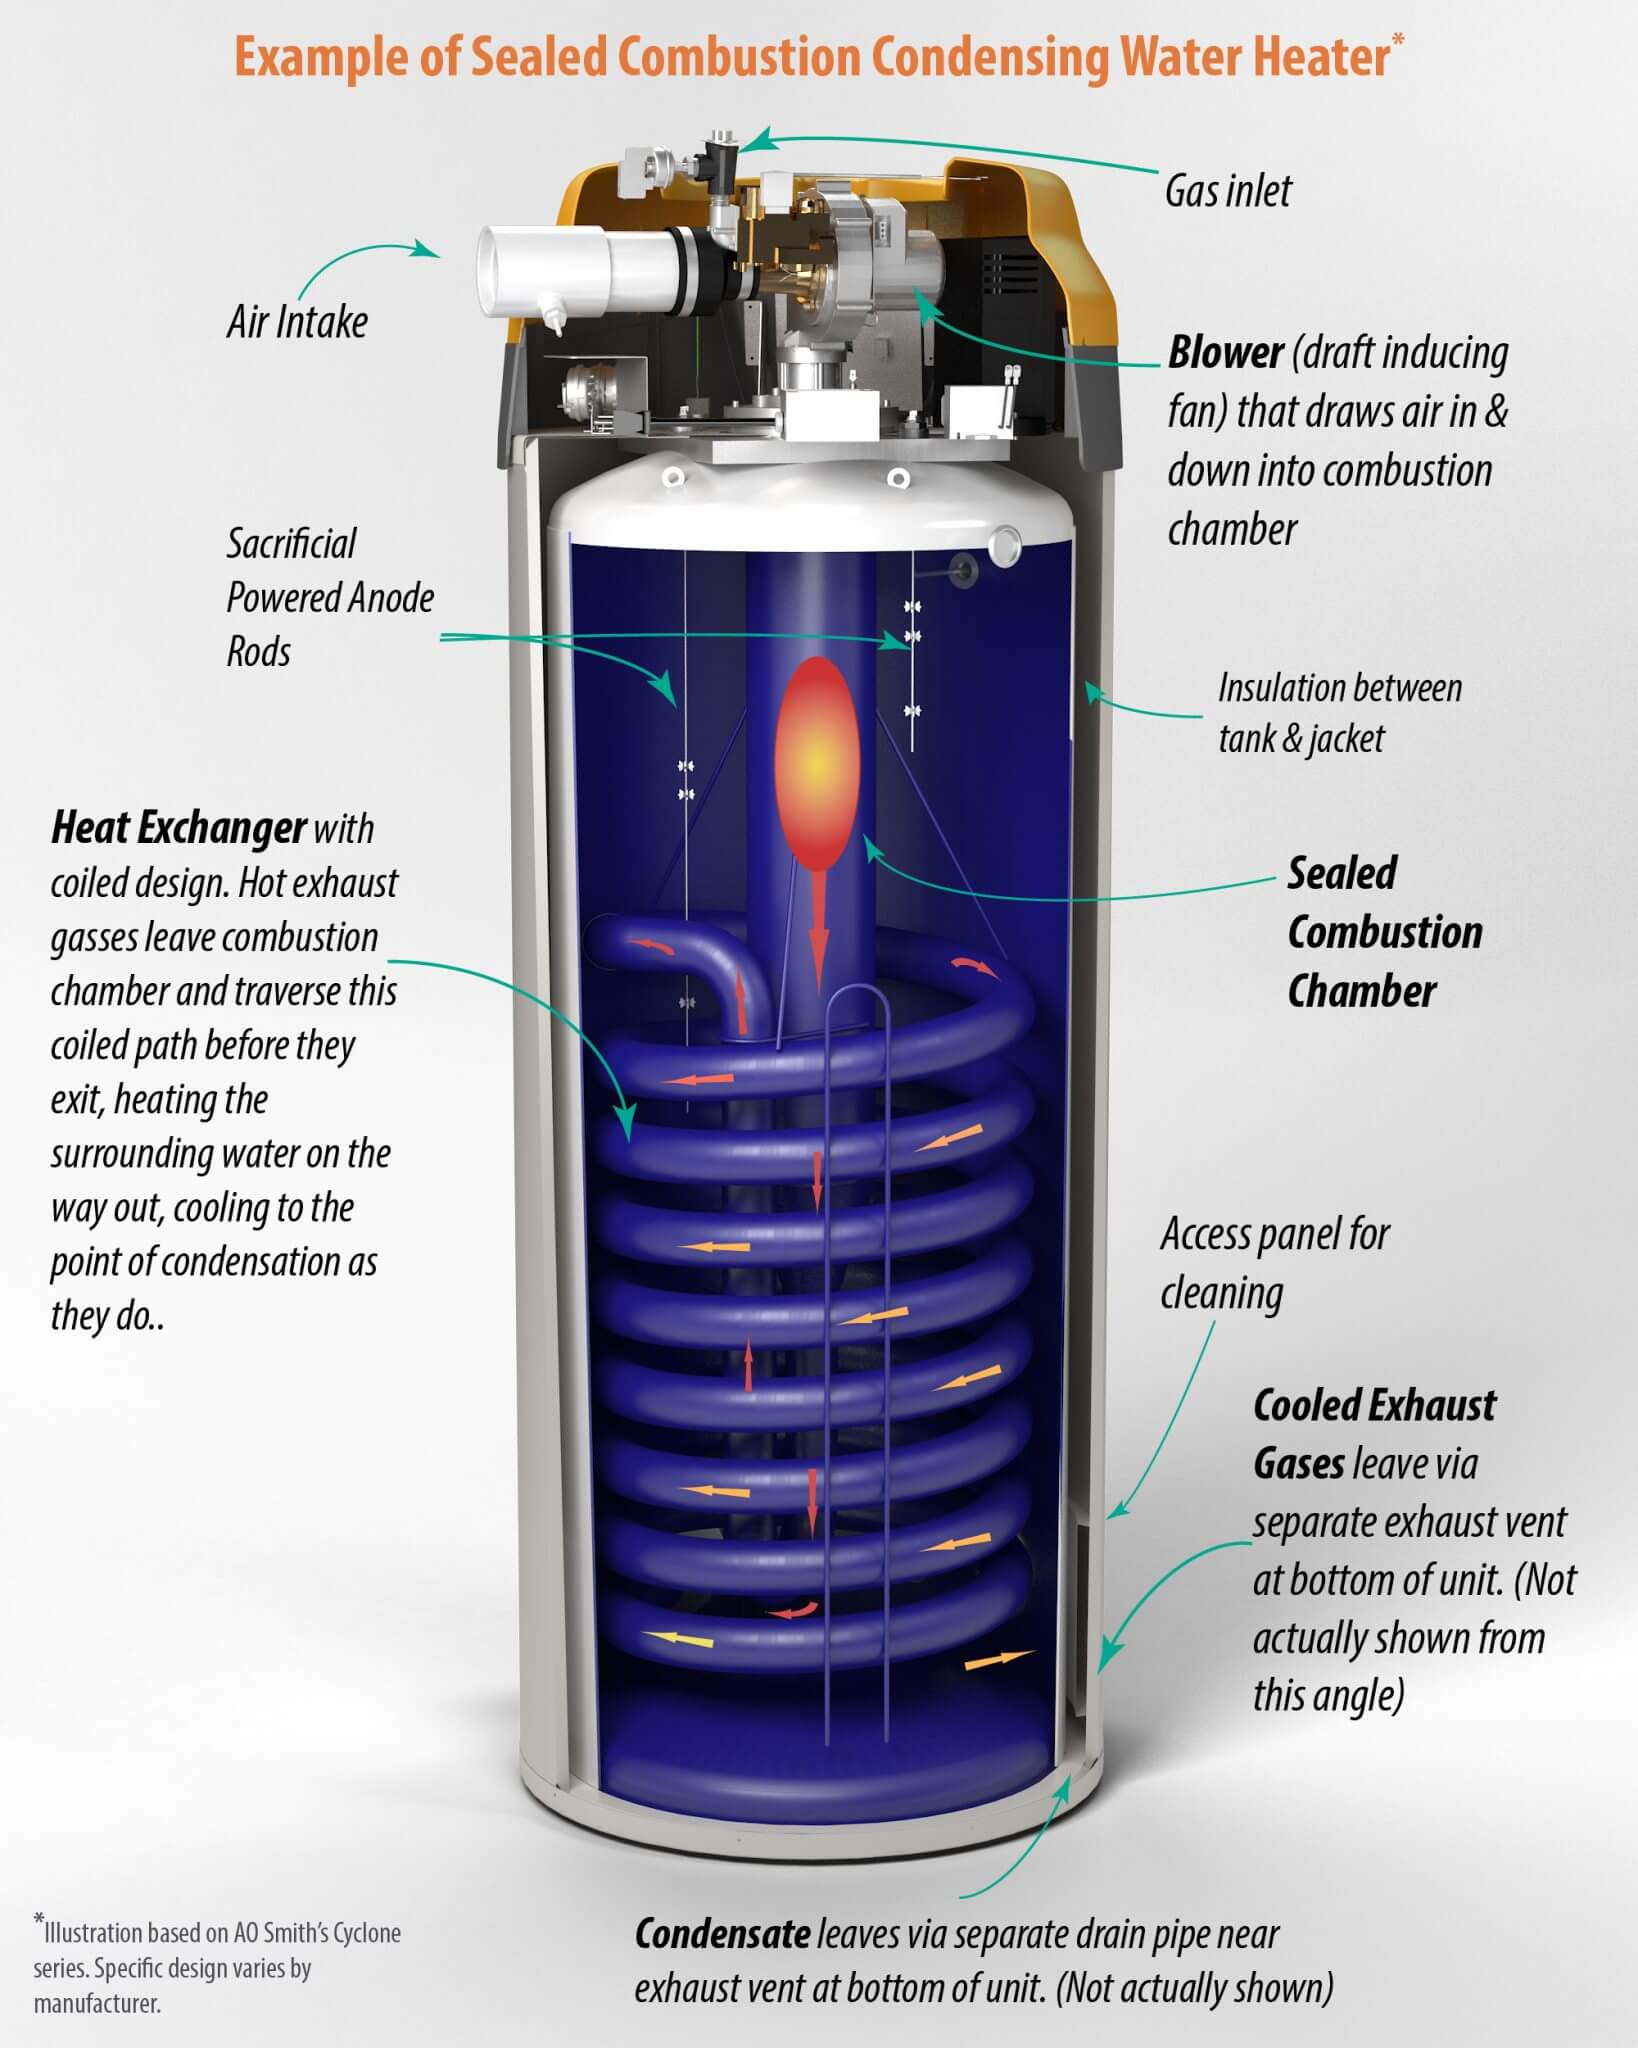 Benefits of a High Efficiency Hot Water Heater